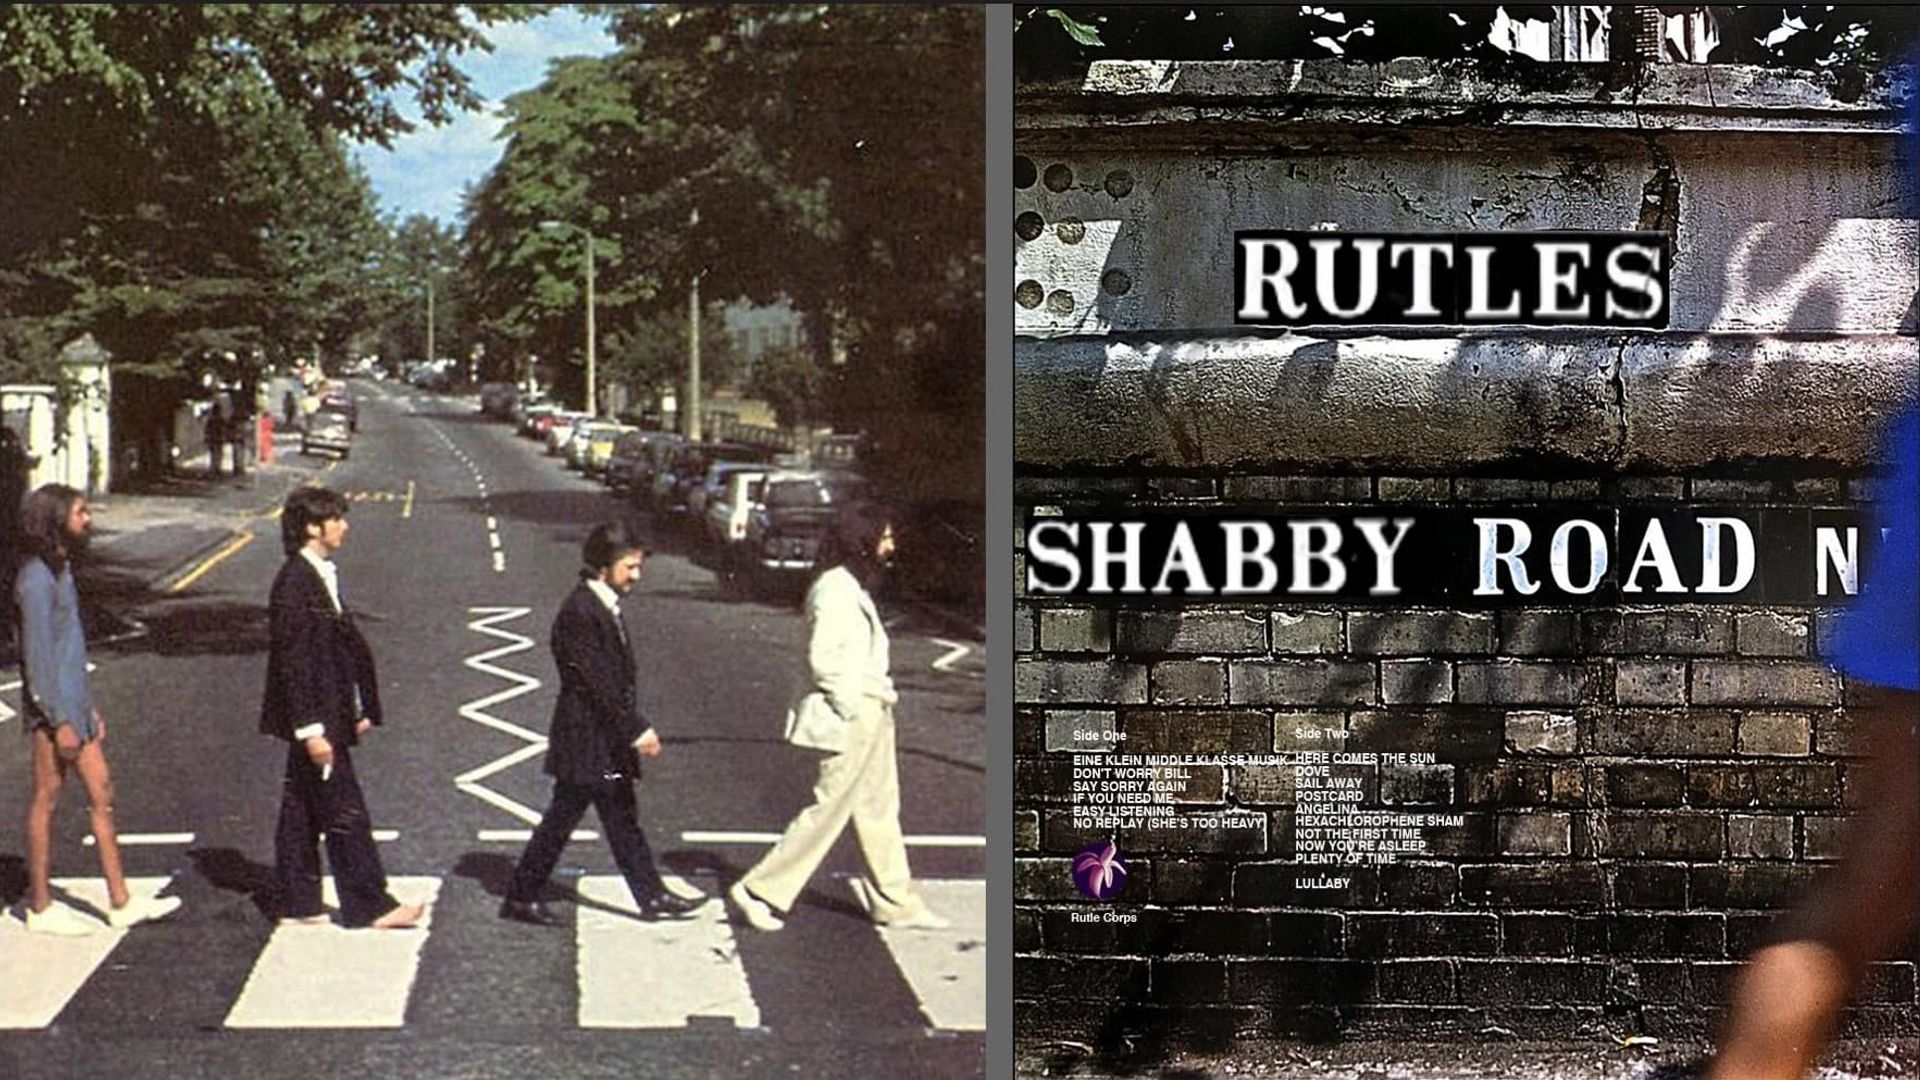 Inside Shabby Road: The Music of 'The Rutles' background